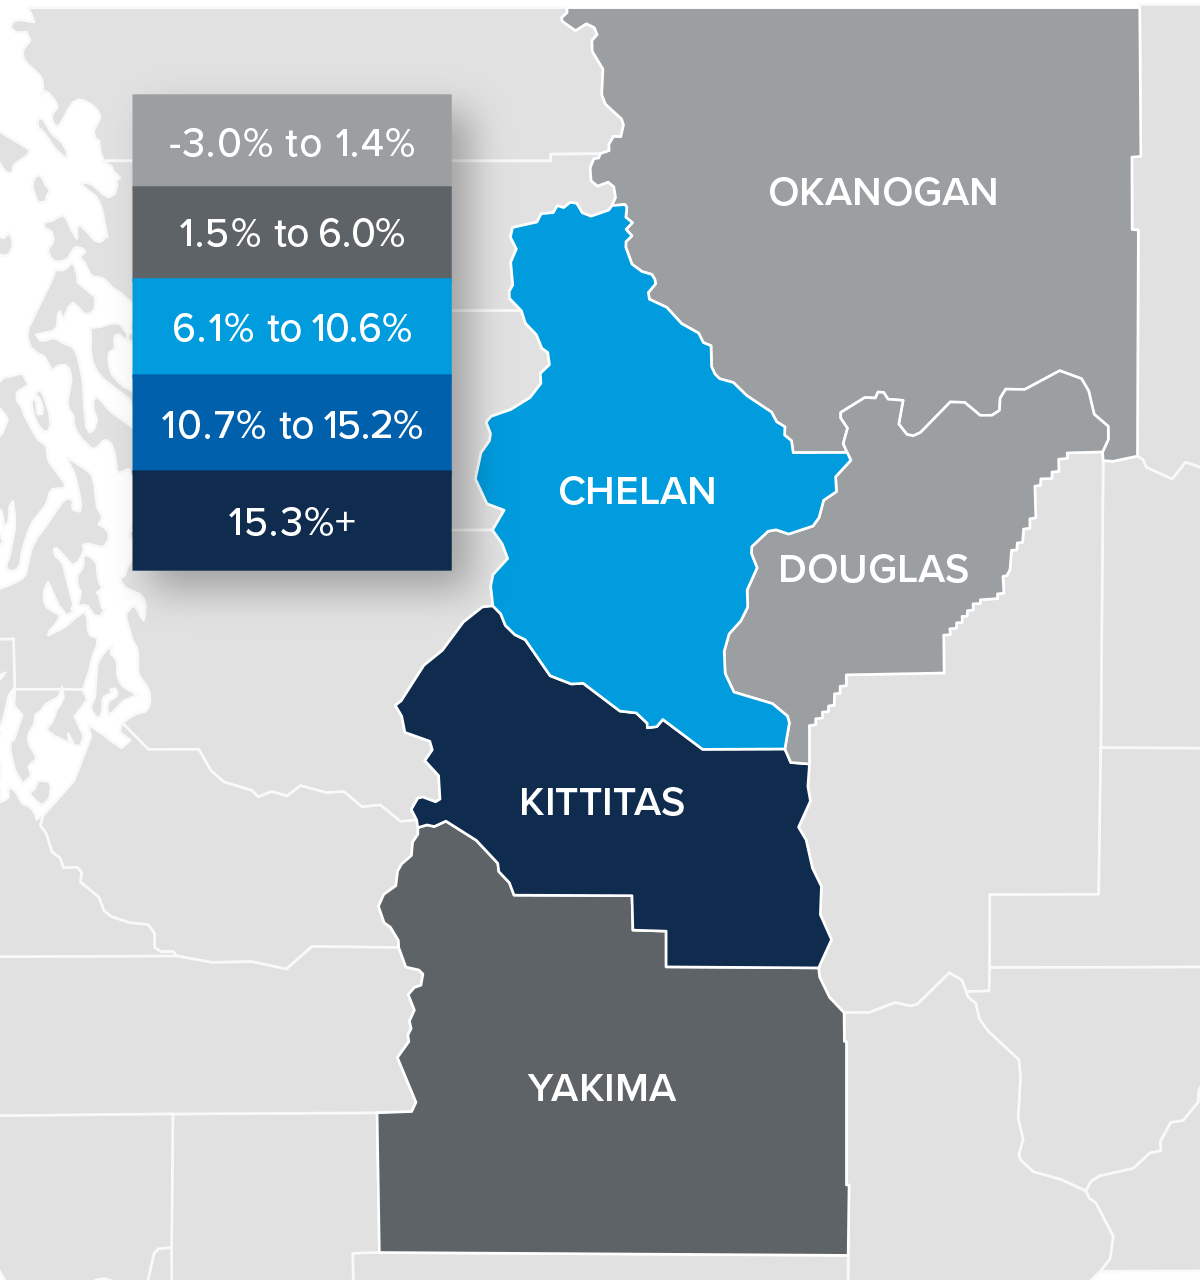 A map showing the real estate home prices percentage changes for various counties in Central Washington. Different colors correspond to different tiers of percentage change. Okanogan and Douglas County have a percentage change in the -3% to 1.4% range. Yakima is in the 1.5% to 6% change range, Chelan is in the 6.1% to 10.6% range, and Kittitas is in the 15.3%+ range.